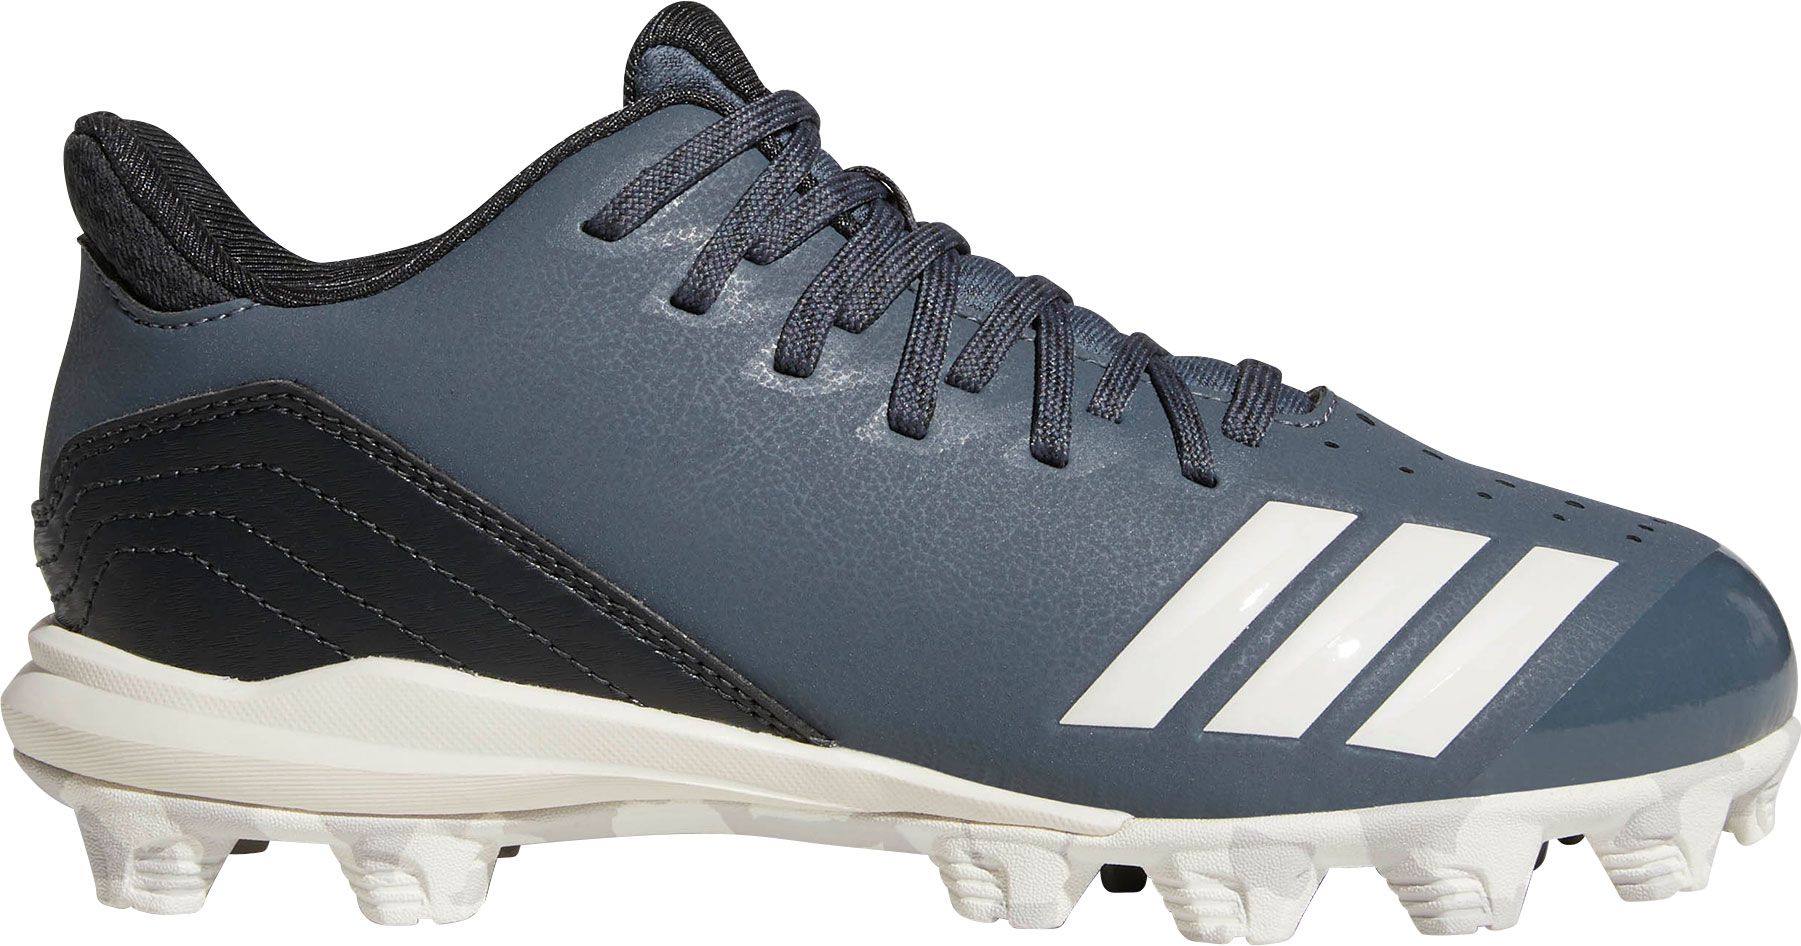 adidas icon 4 md cleats